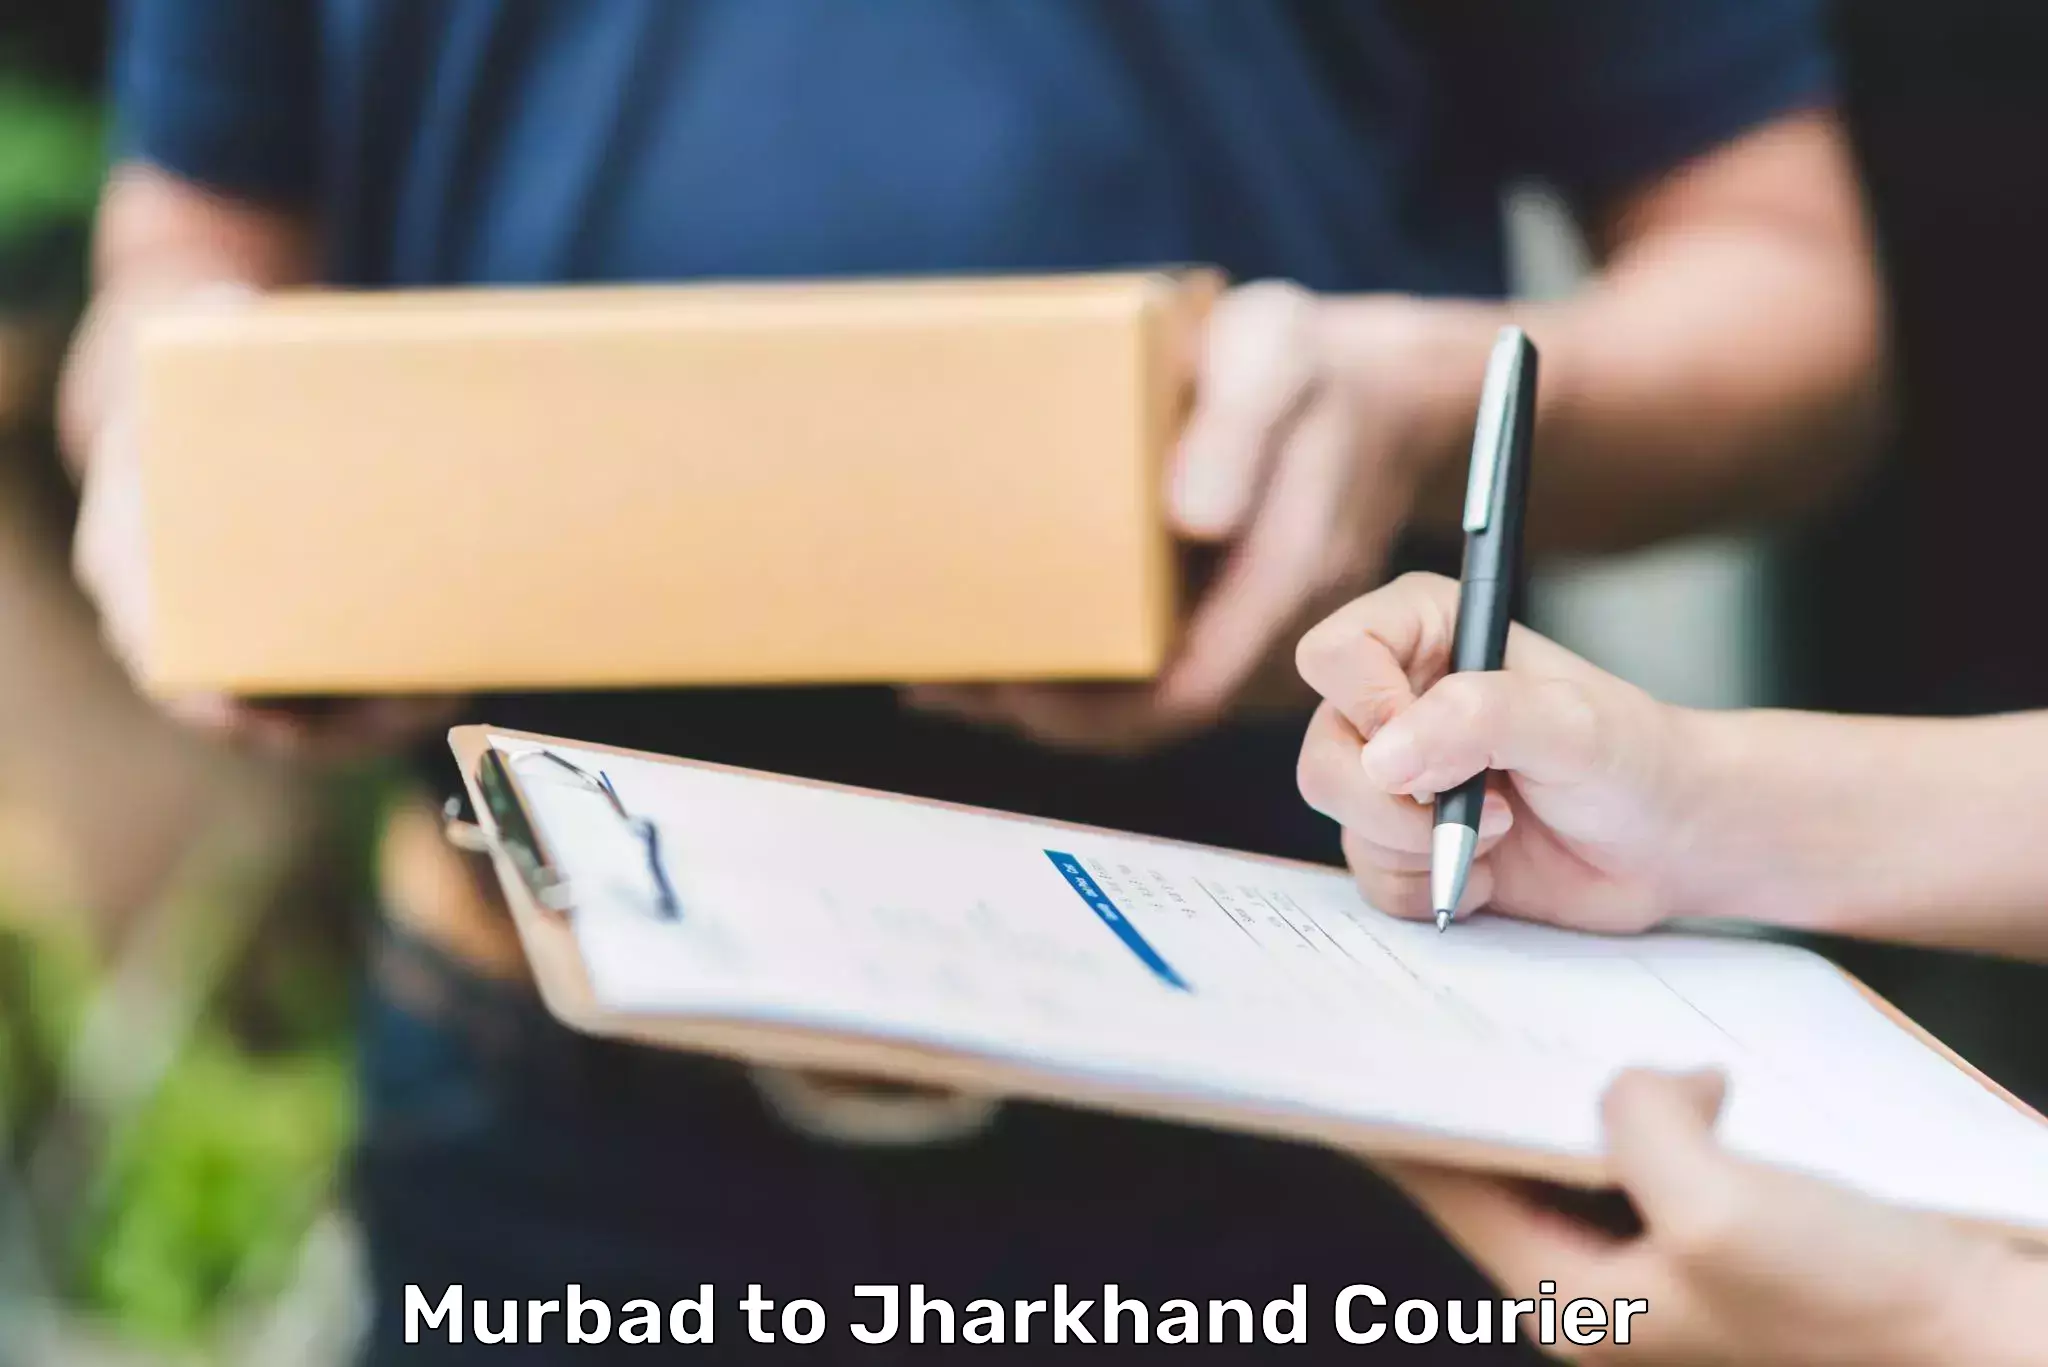 Automated shipping processes Murbad to Jharkhand